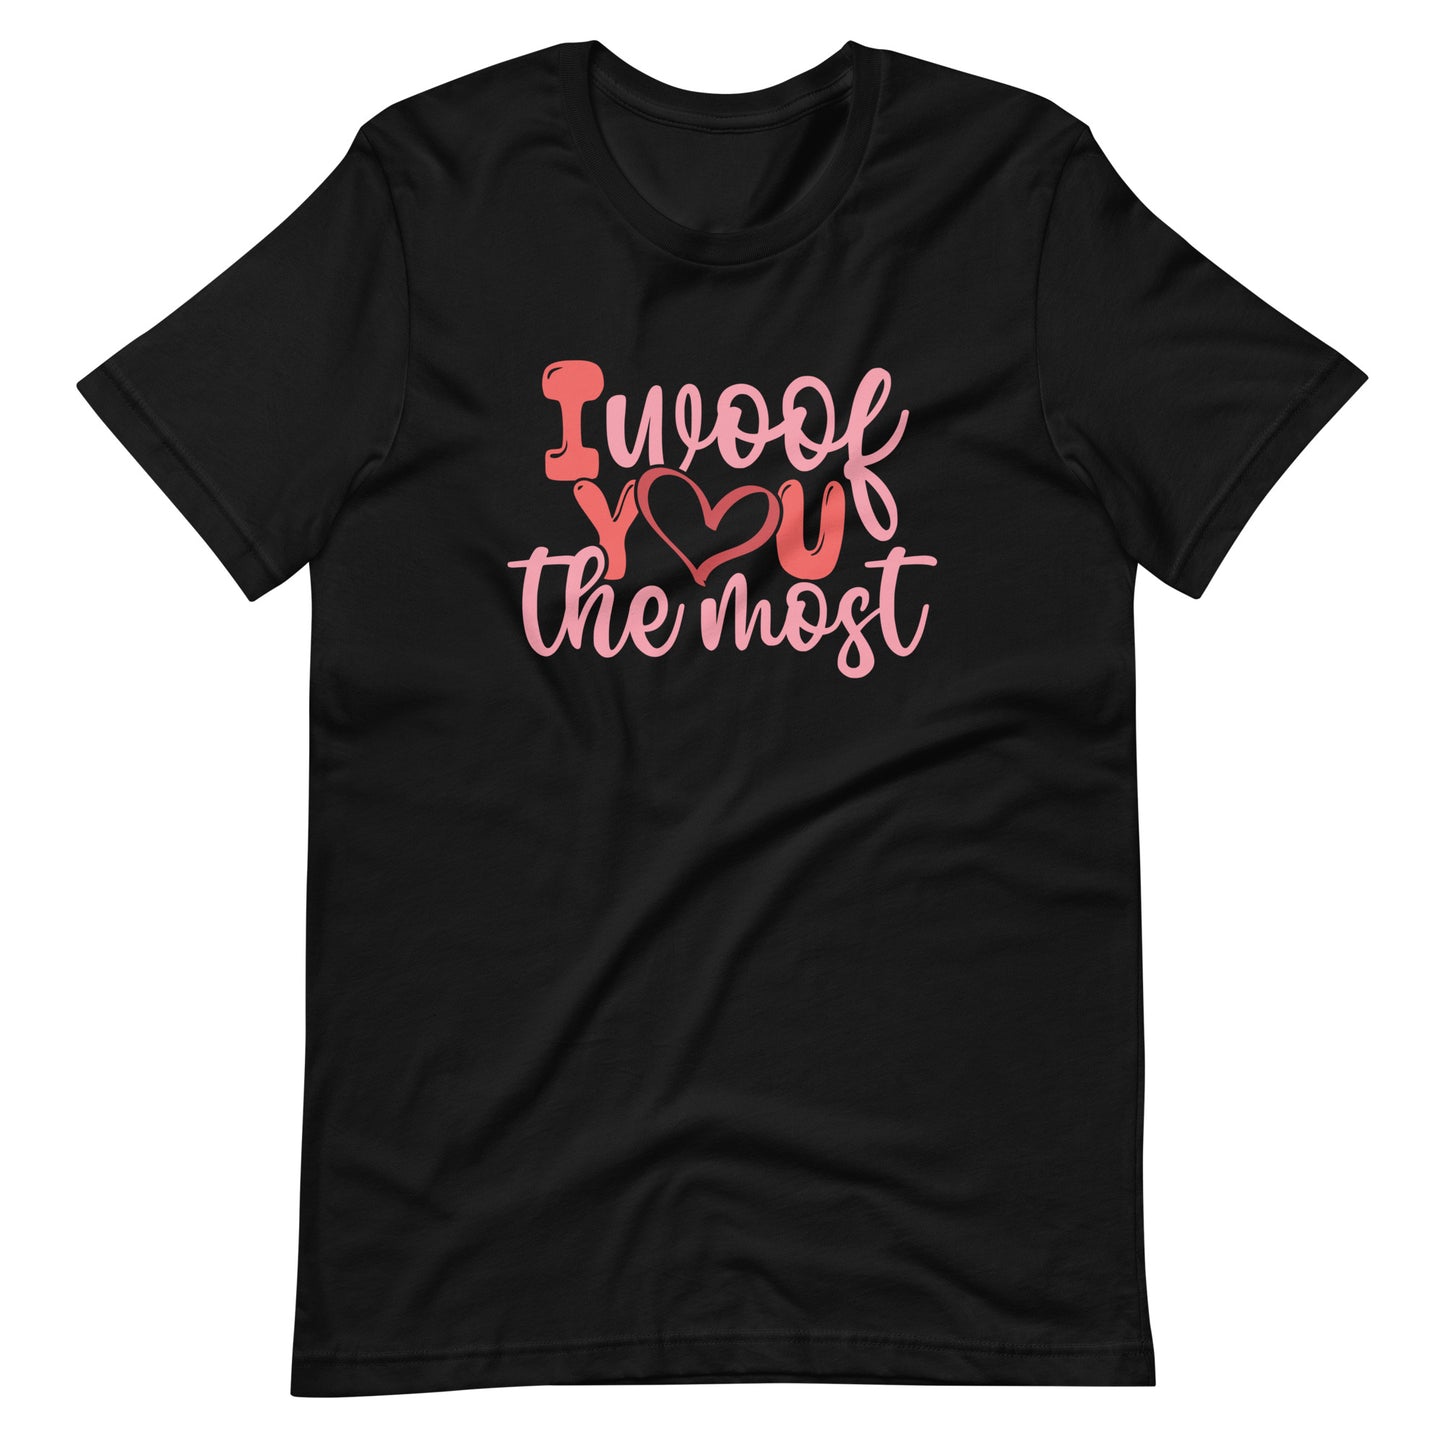 I Woof You The Most Valentine's Day T-Shirt for Dog Lovers